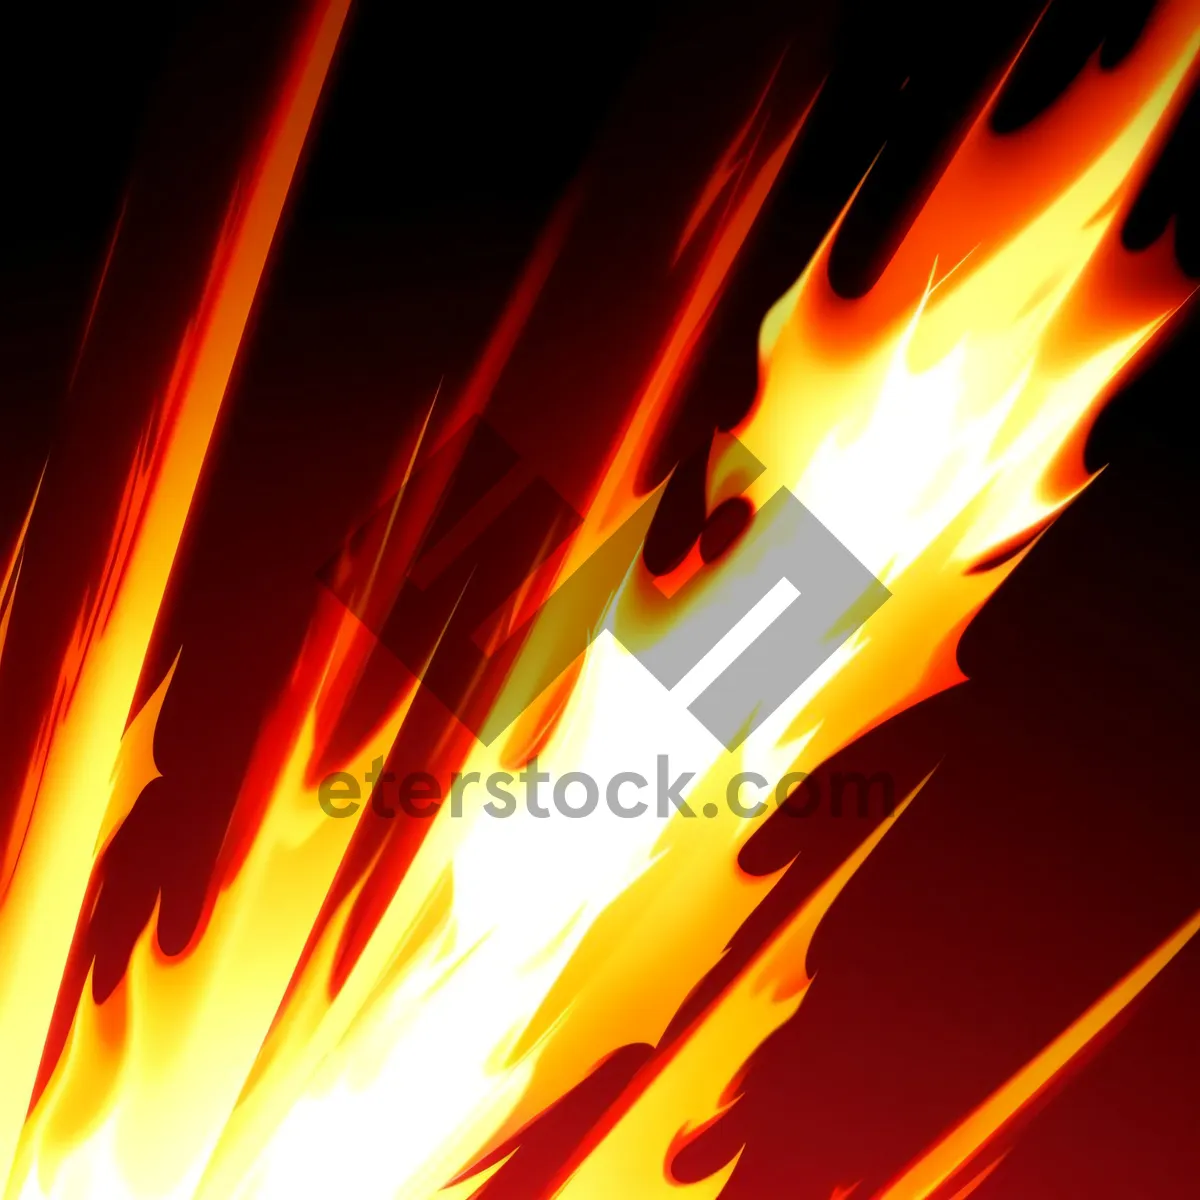 Picture of Blazing Energy: Futuristic Flame Explosion in Bright Colors